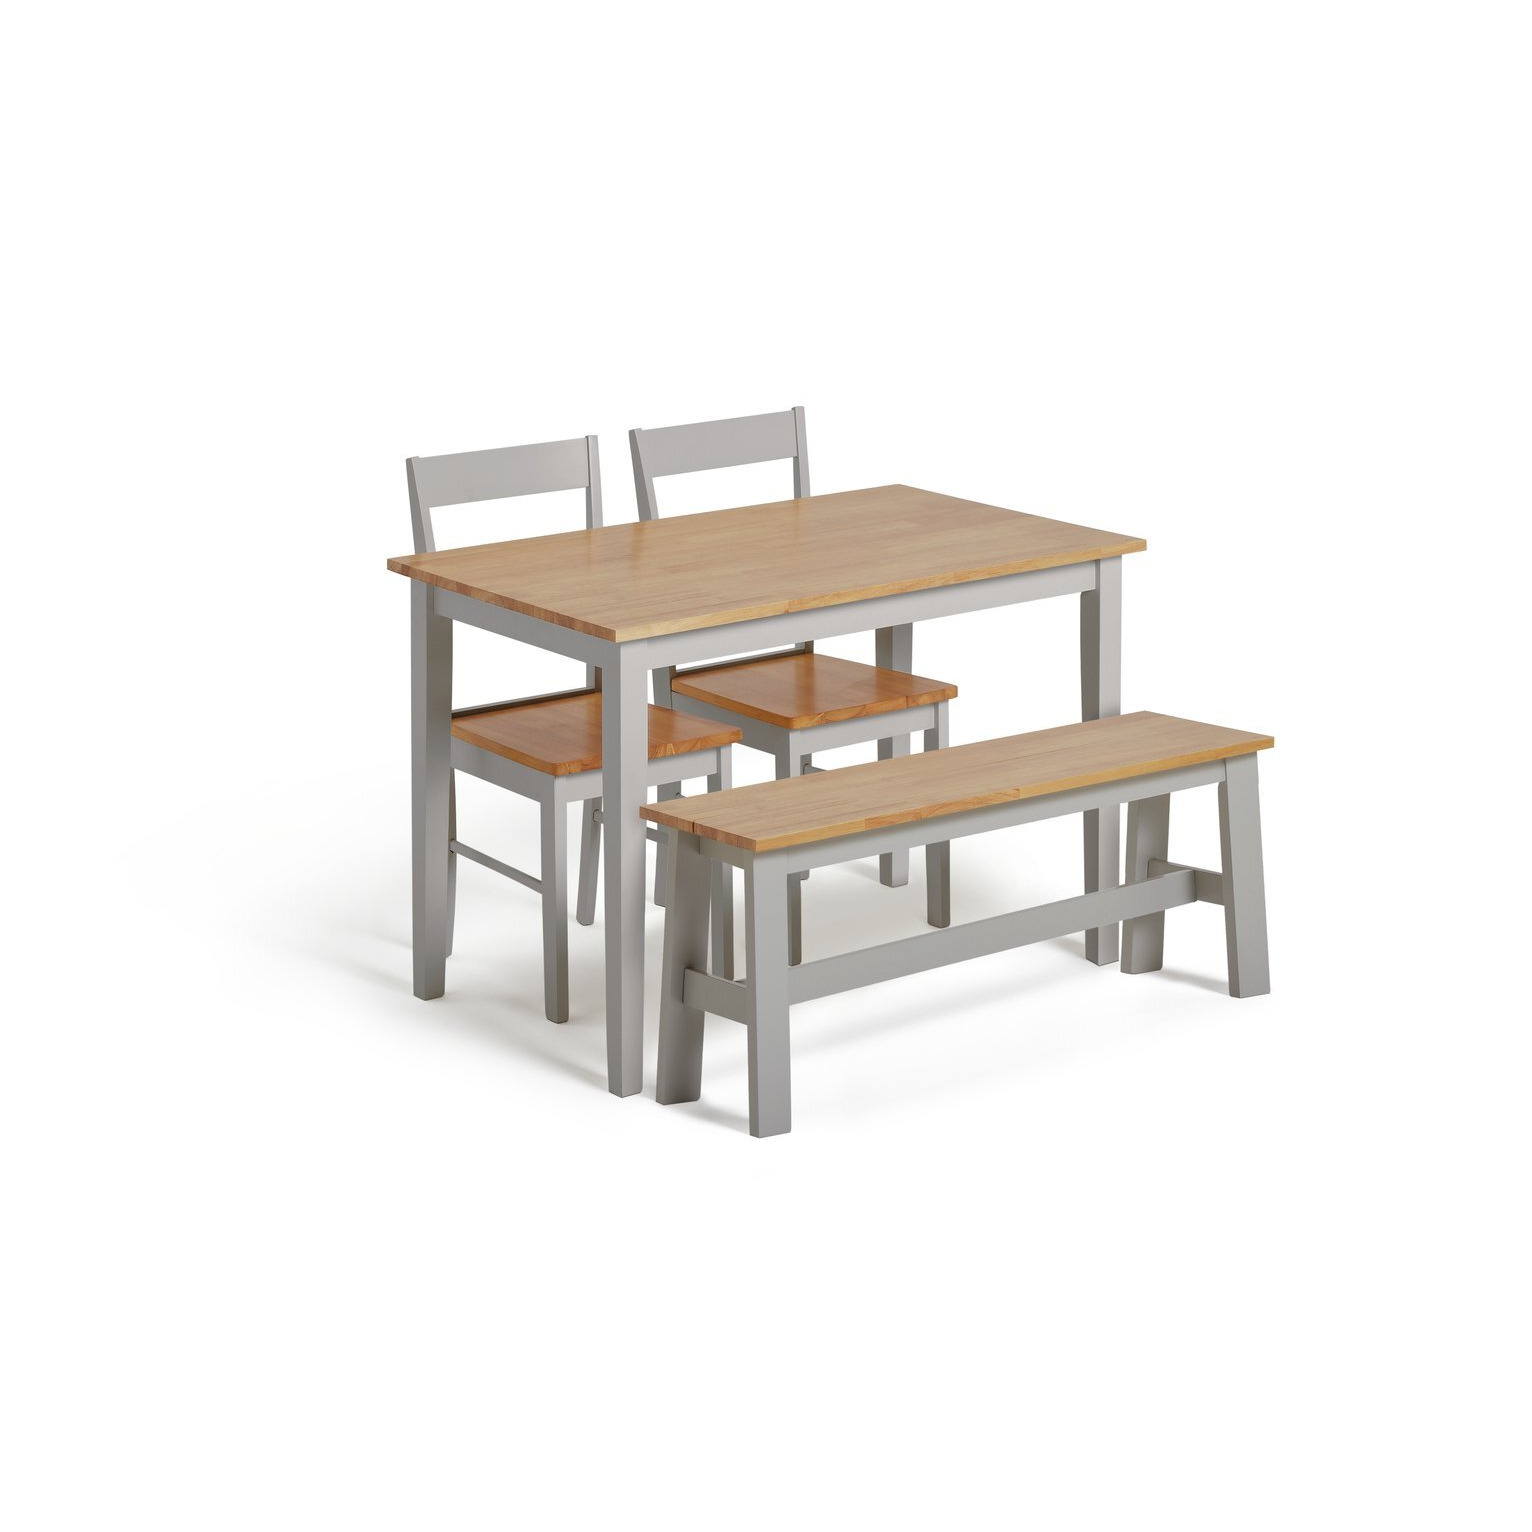 Habitat Chicago Solid Wood Table, Bench & 2 Grey Chairs - image 1